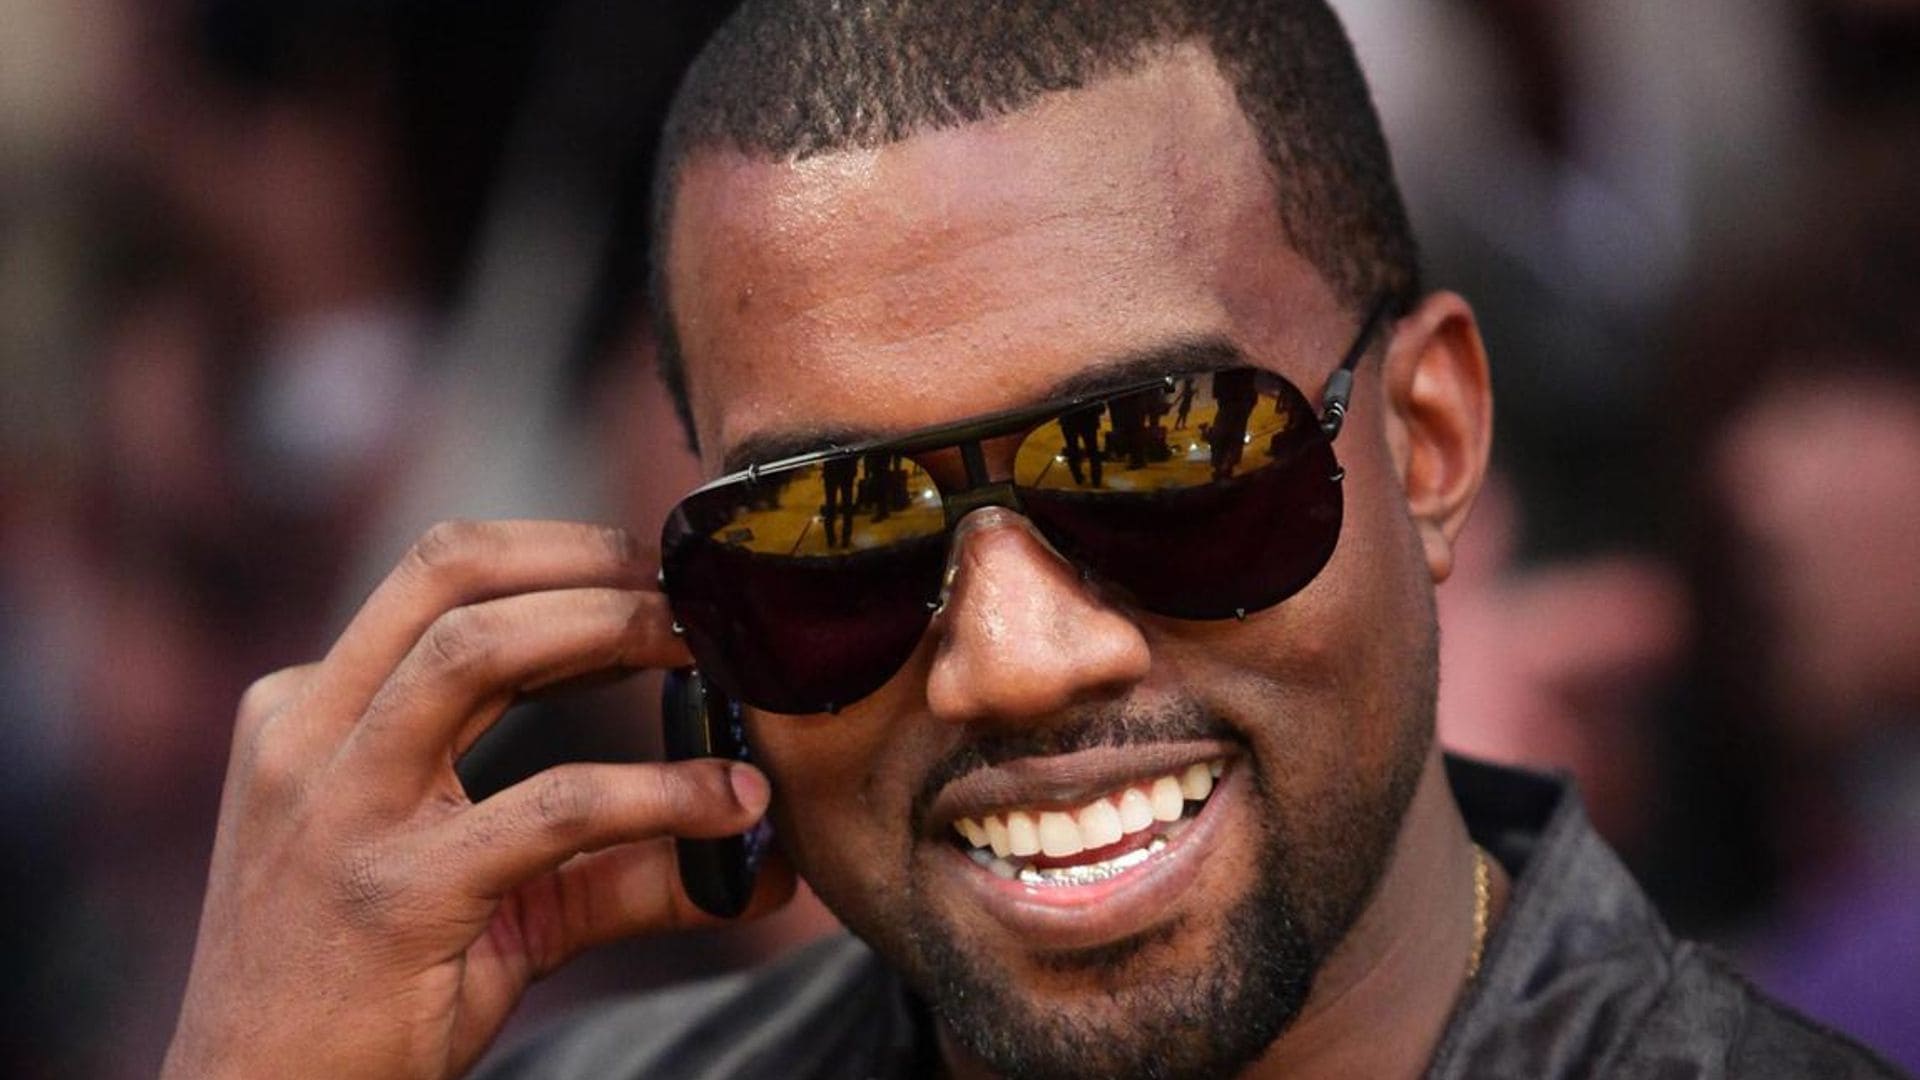 Kanye West received steroid injections for ‘too much texting’